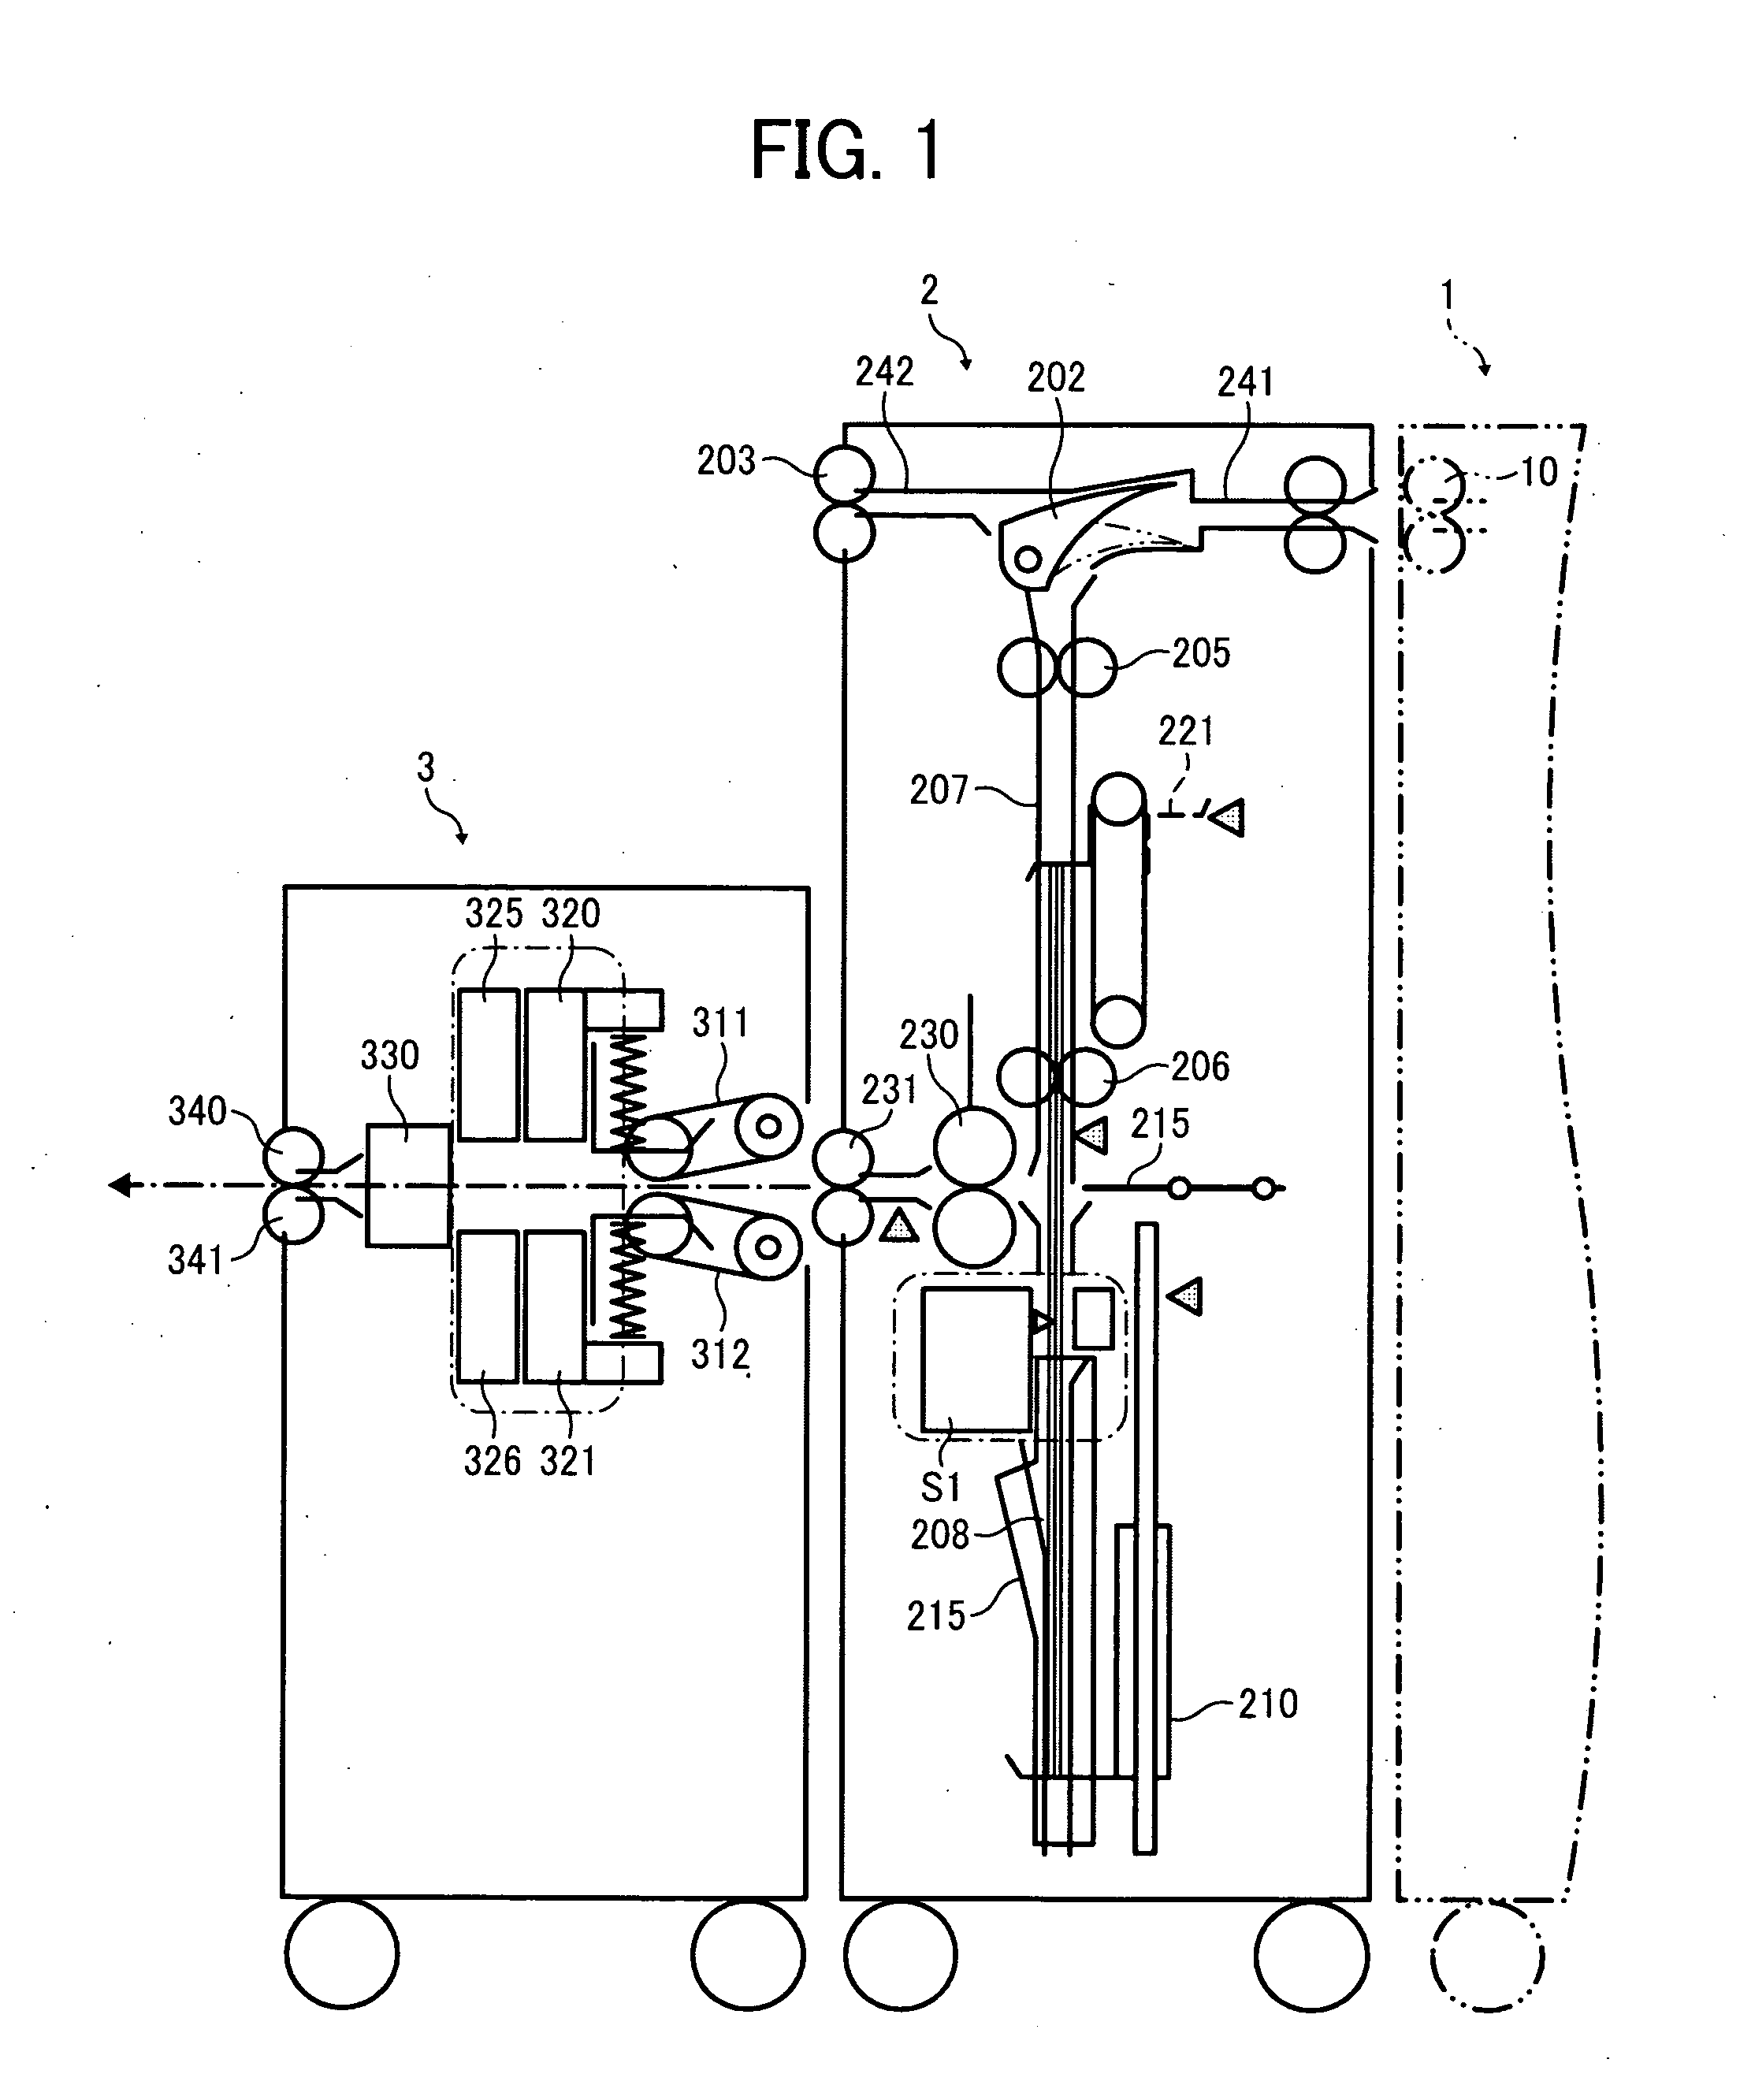 Spine formation device, post-processing apparatus, and bookbinding system